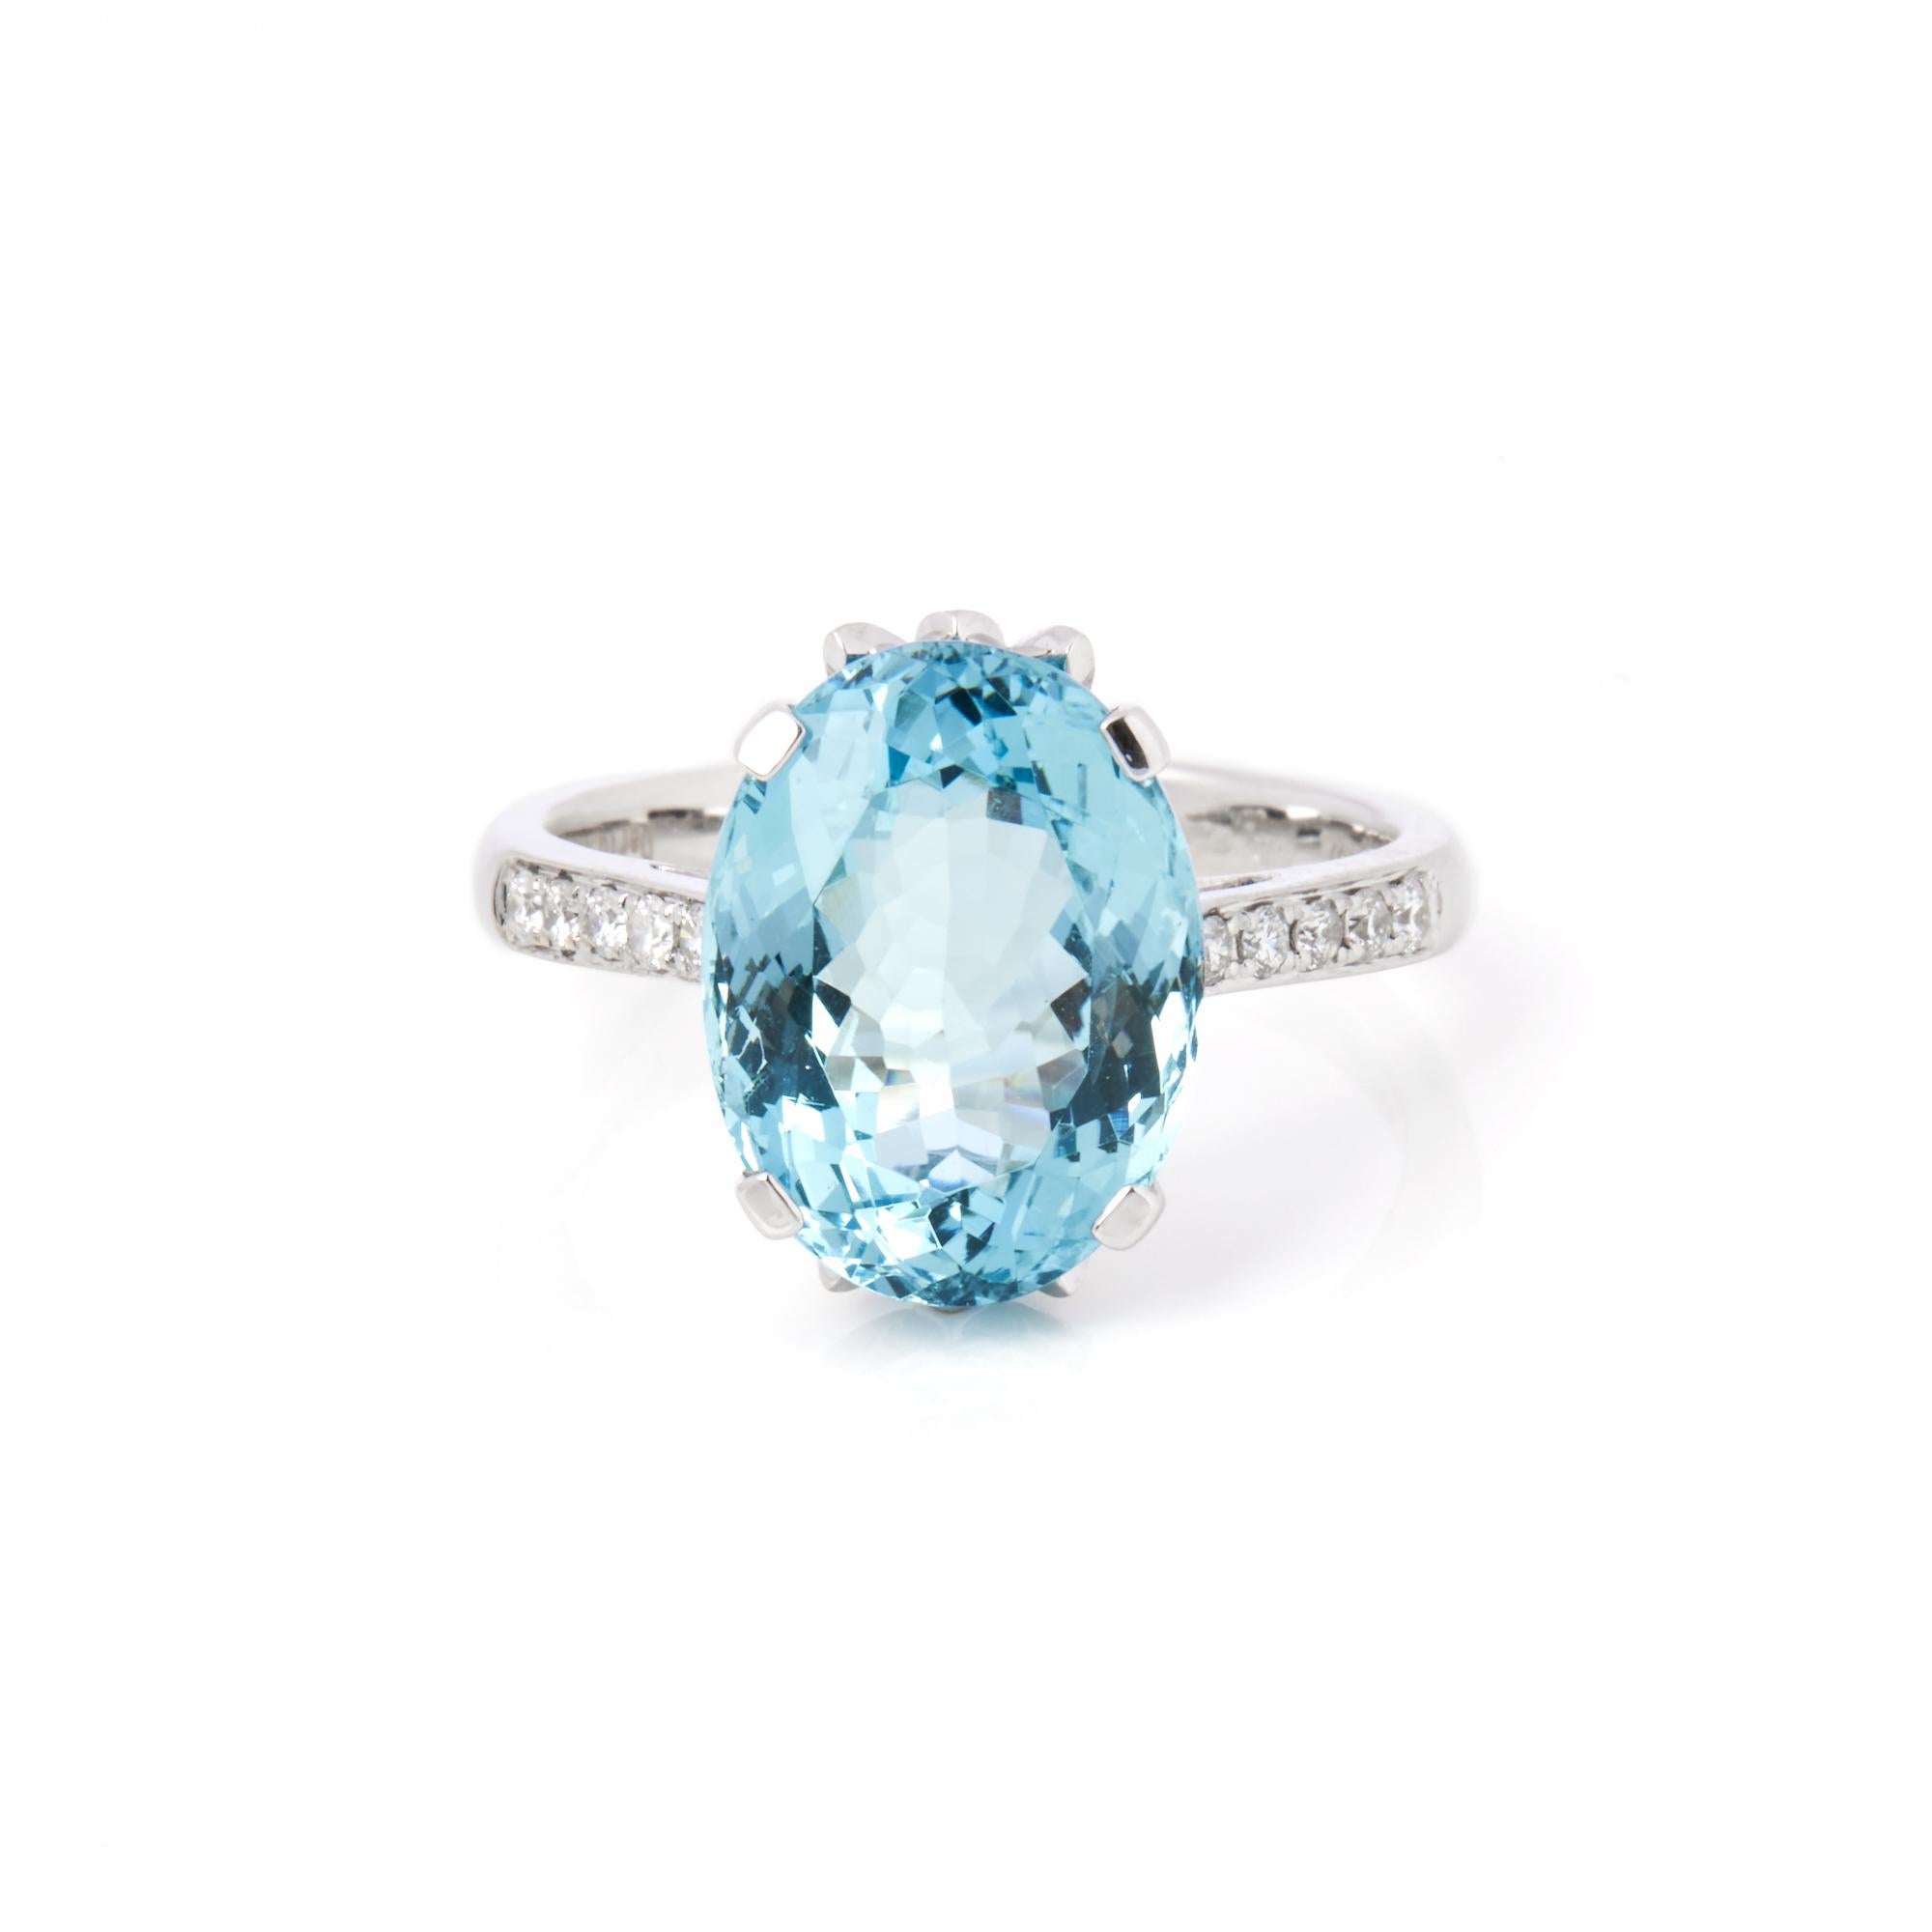 This ring is from the private collection of gemstone jewellery individually designed by David Jerome. It features an oval cut aquamarine set with diamonds. Accompanied by a WGI gem certificate. UK ring size N. EU ring size 54. US ring size 7. 